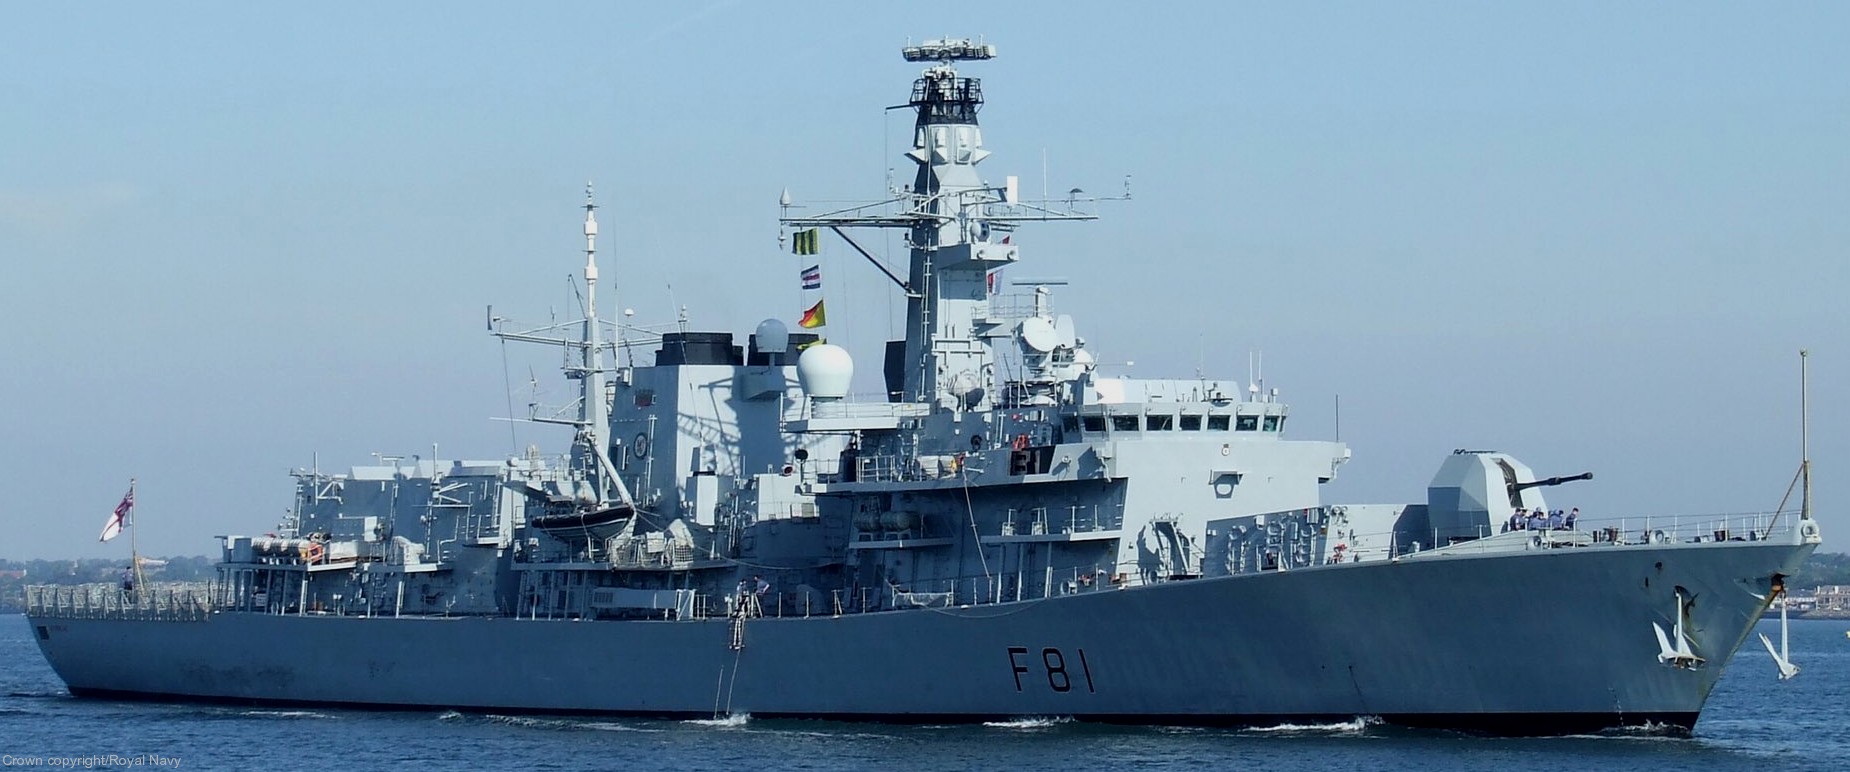 f-81 hms sutherland type 23 duke class guided missile frigate ffg royal navy 22